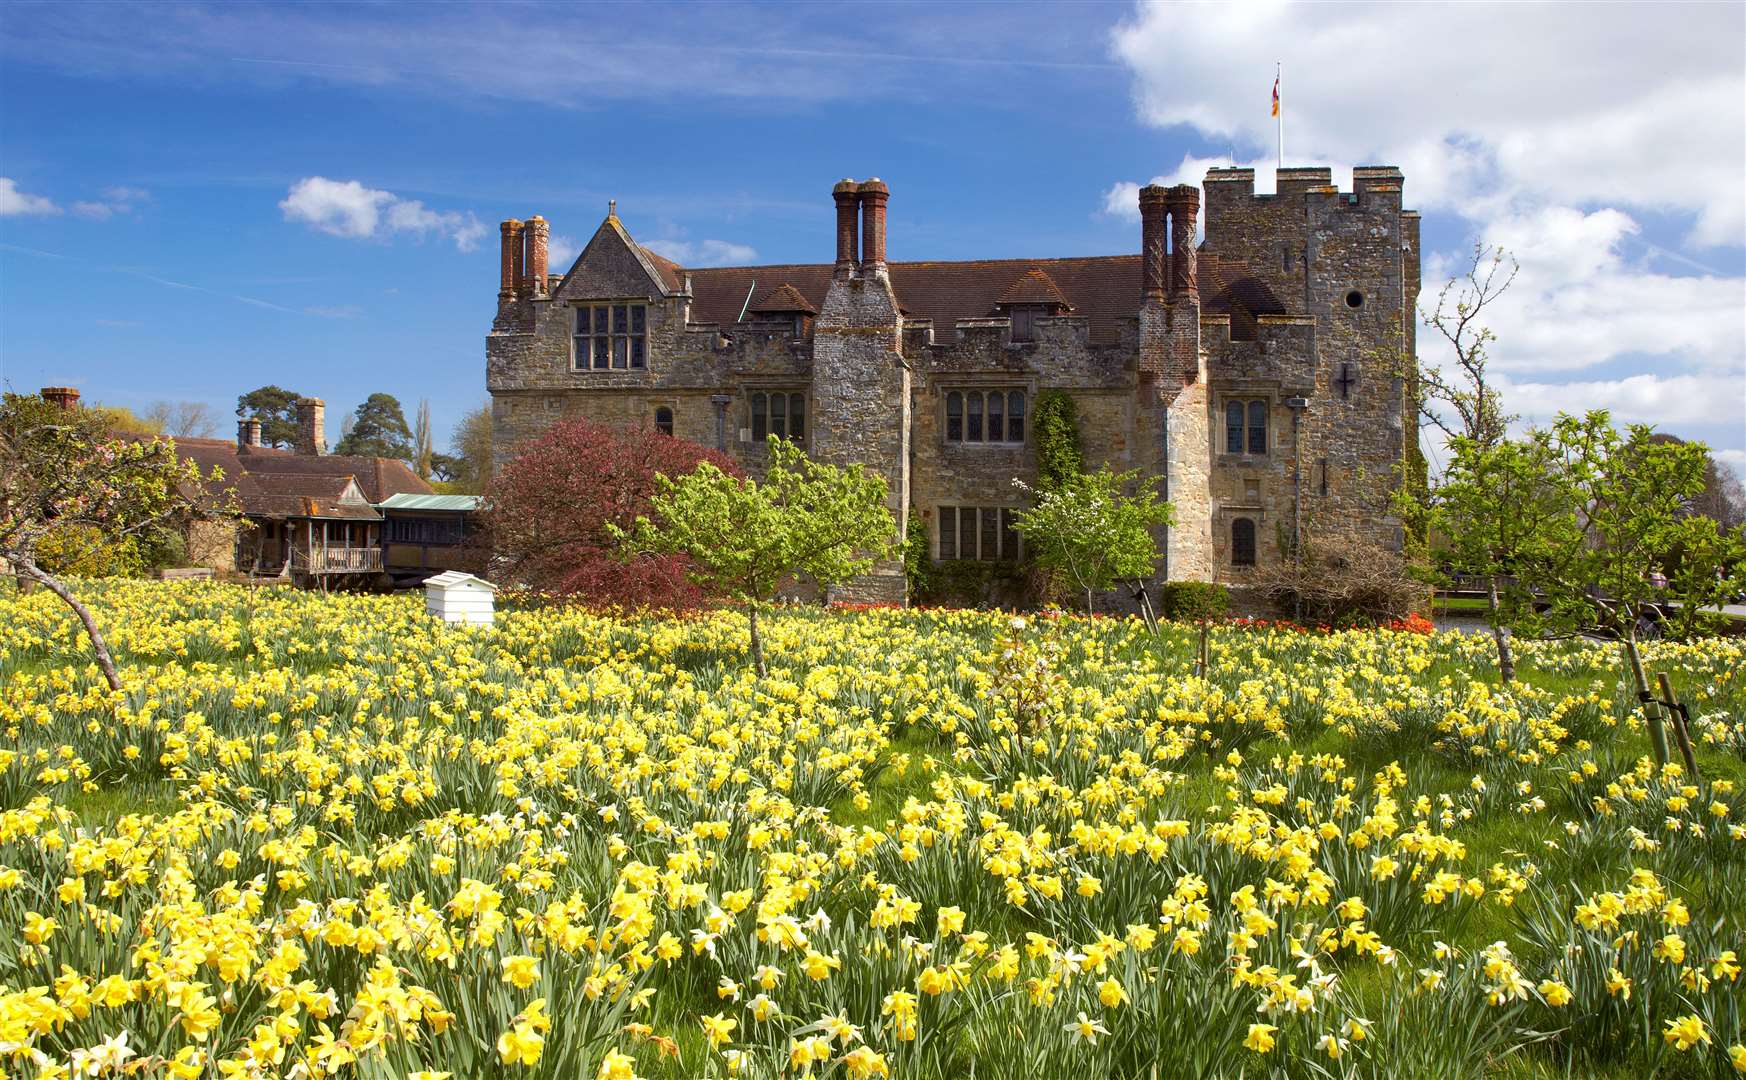 The castle's display has around 250,000 daffodils each year. Picture: Hever Castle and Gardens